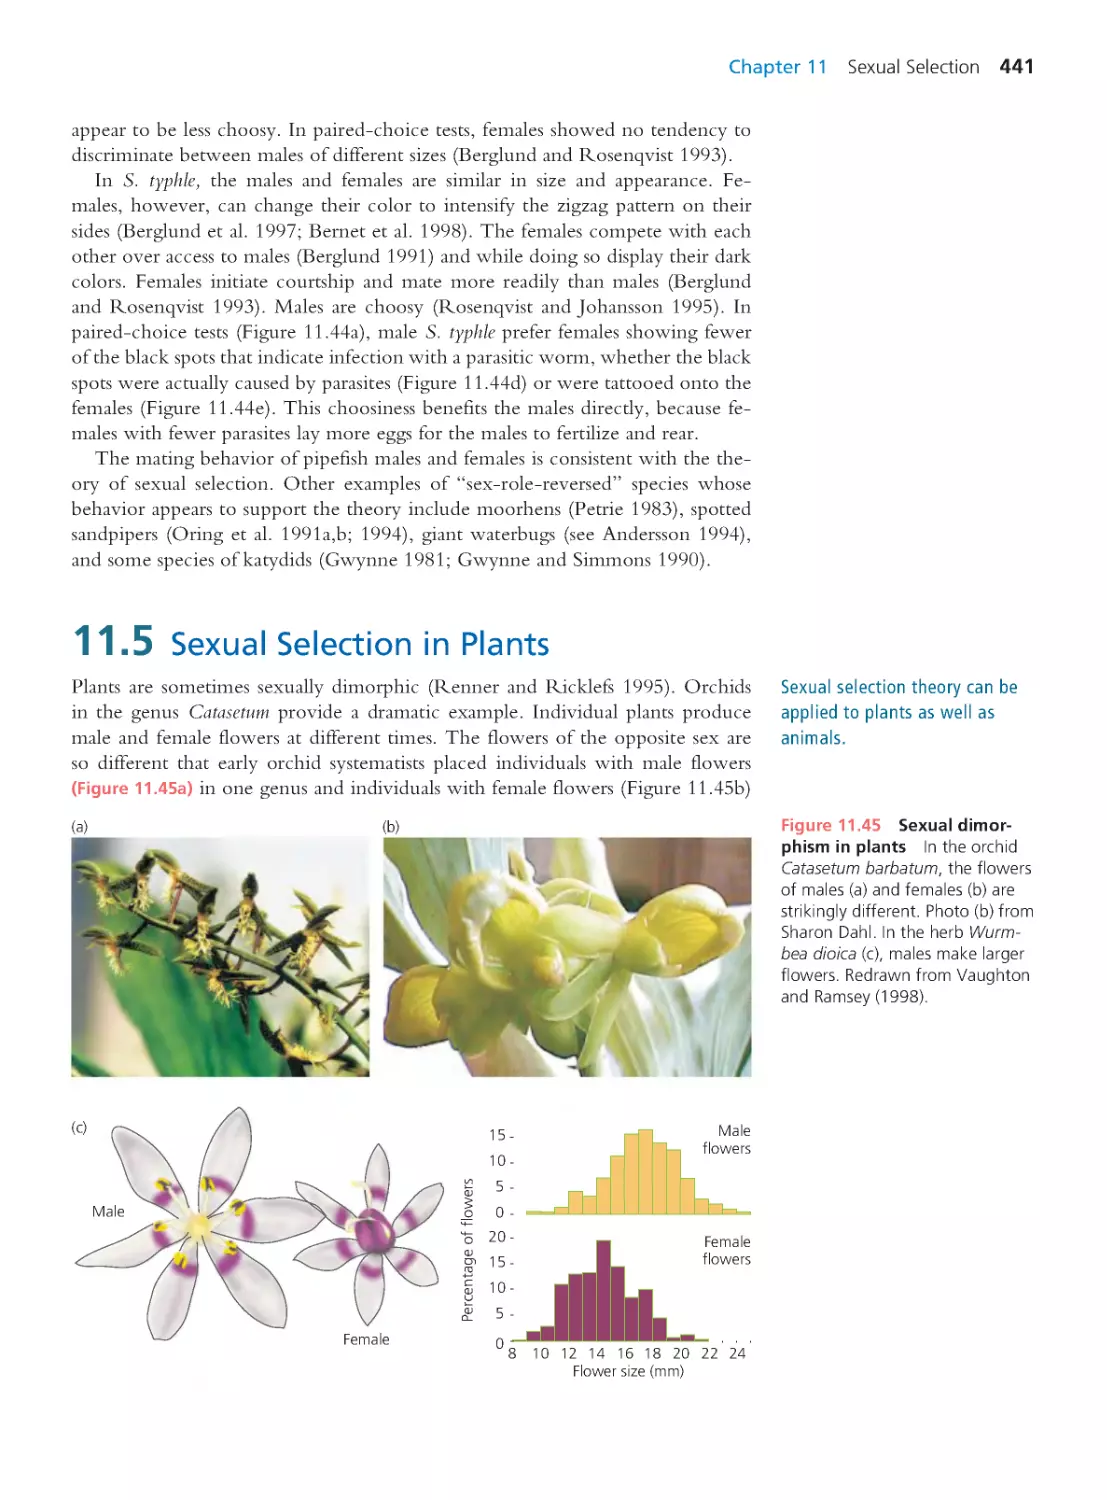 11.5 Sexual Selection in Plants